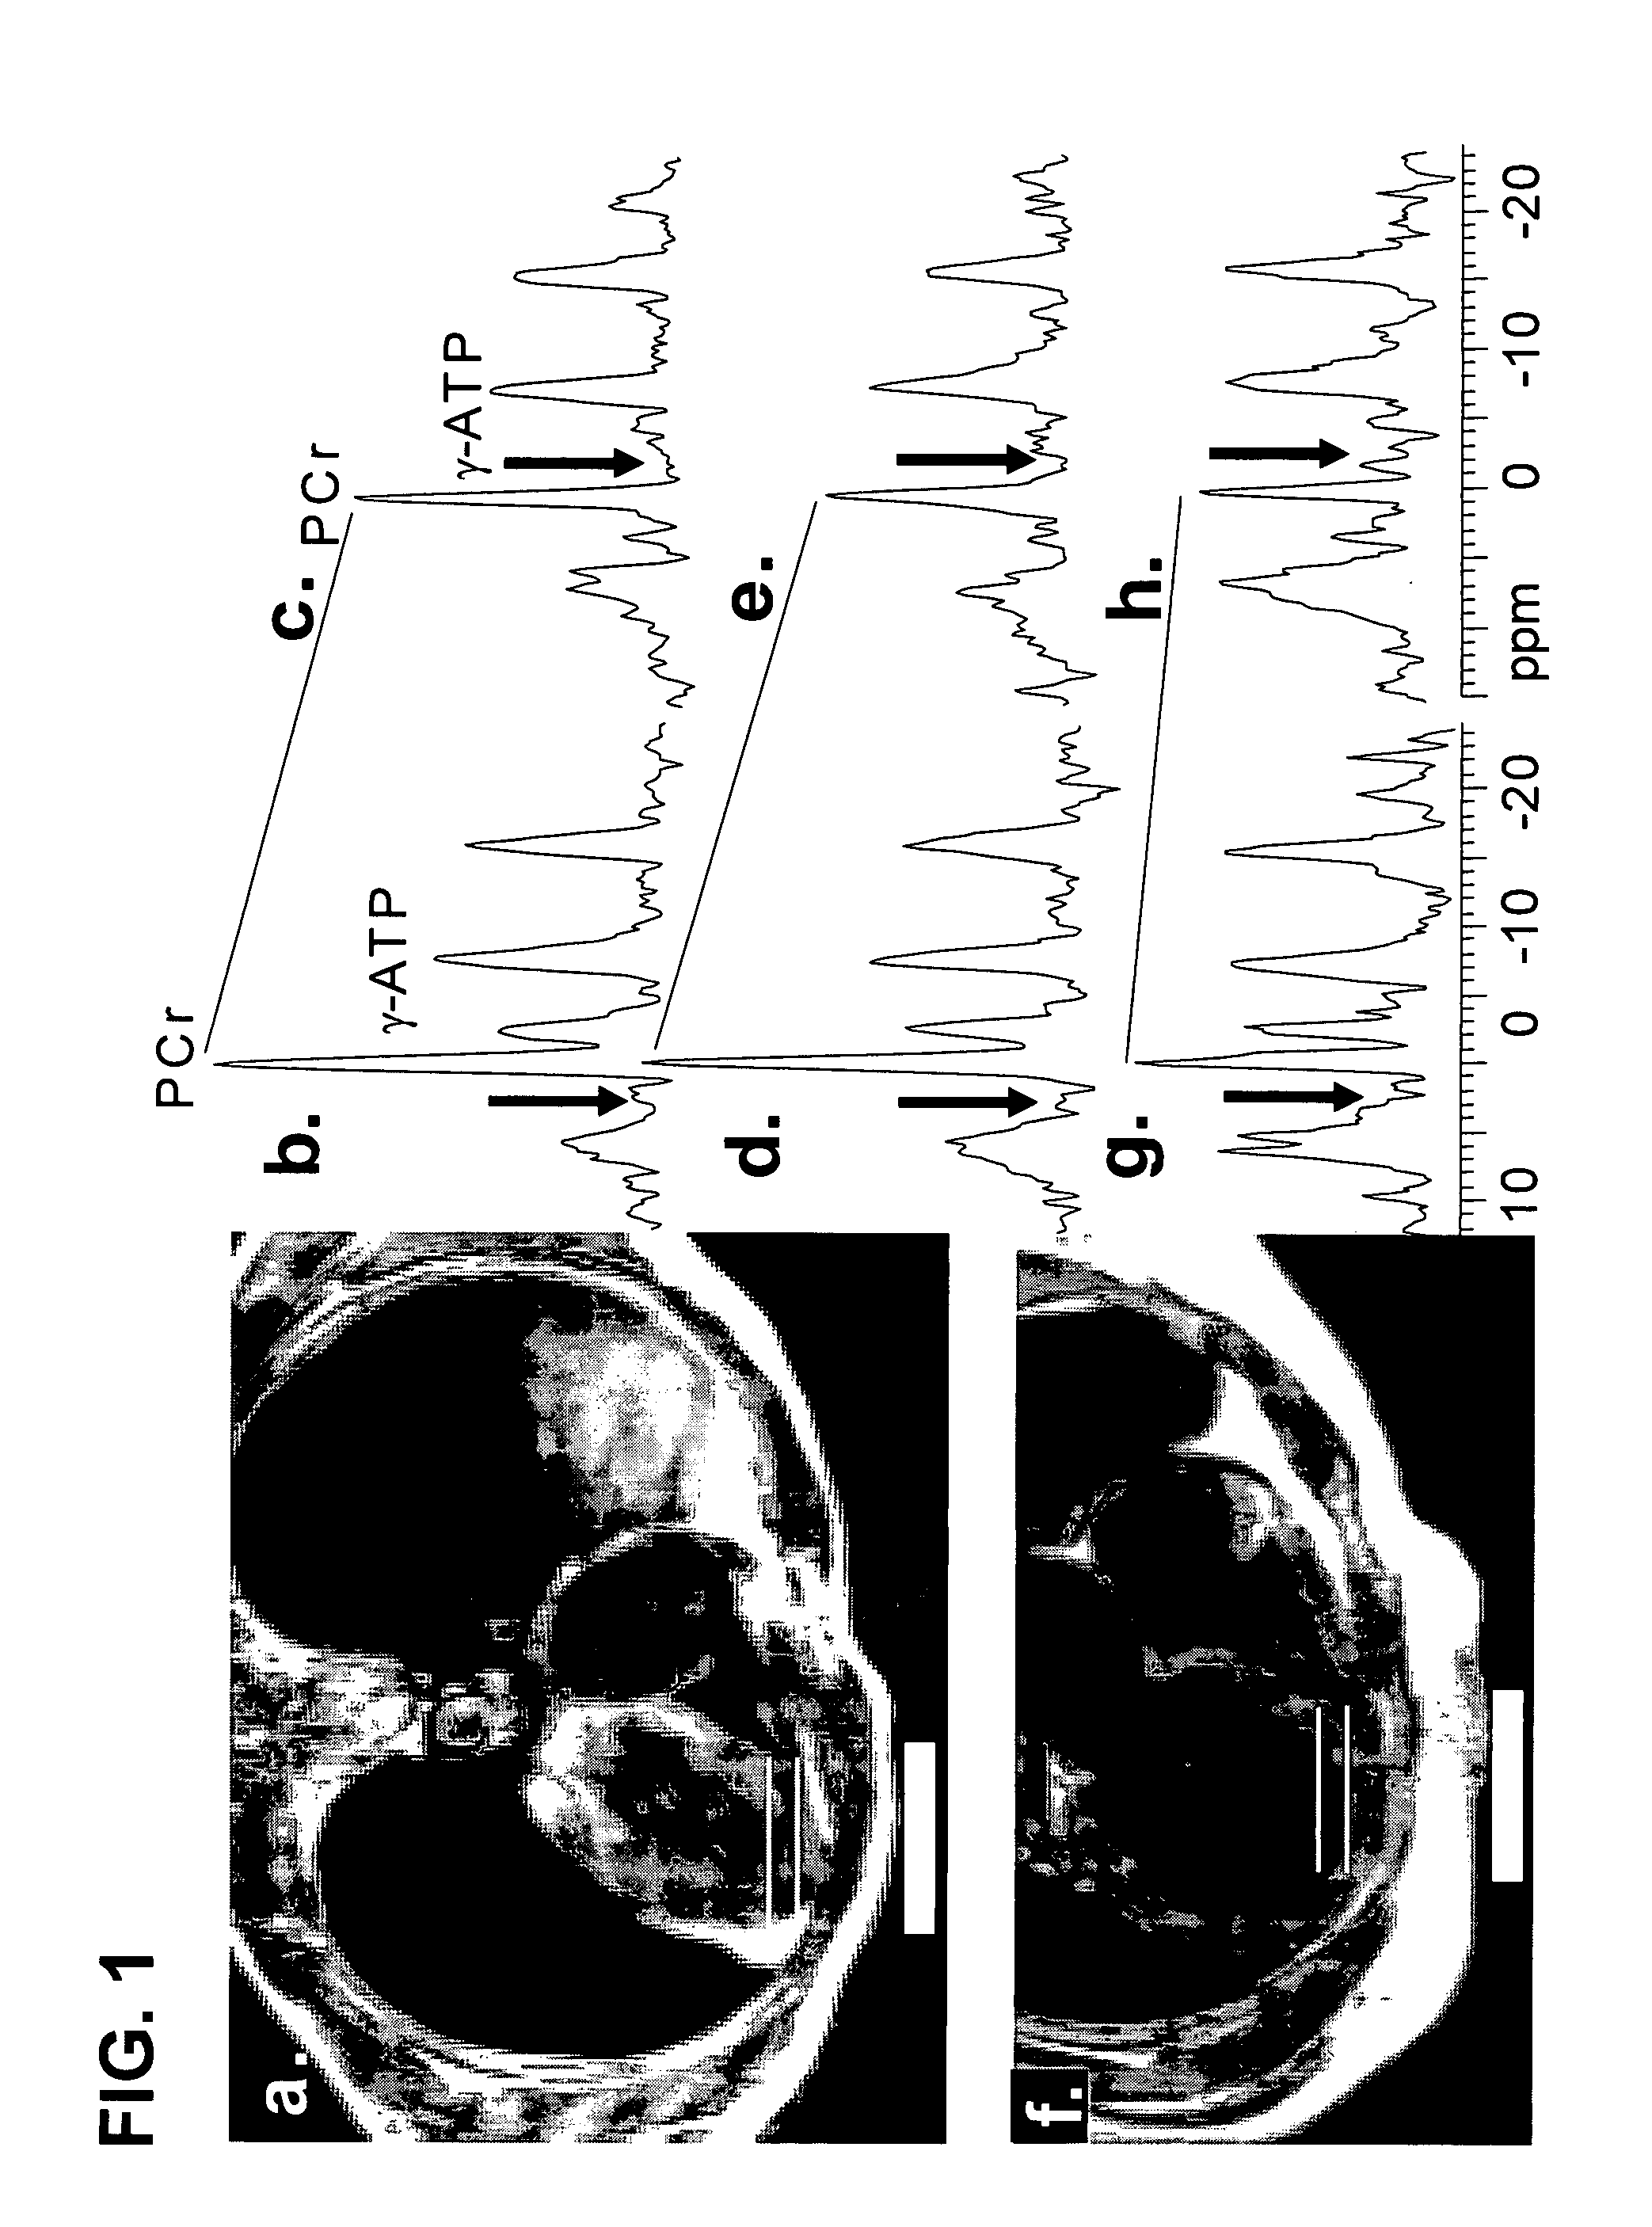 Methods to improve creatine kinase metabolism and contractile function in cardiac muscle for the treatment of heart failure